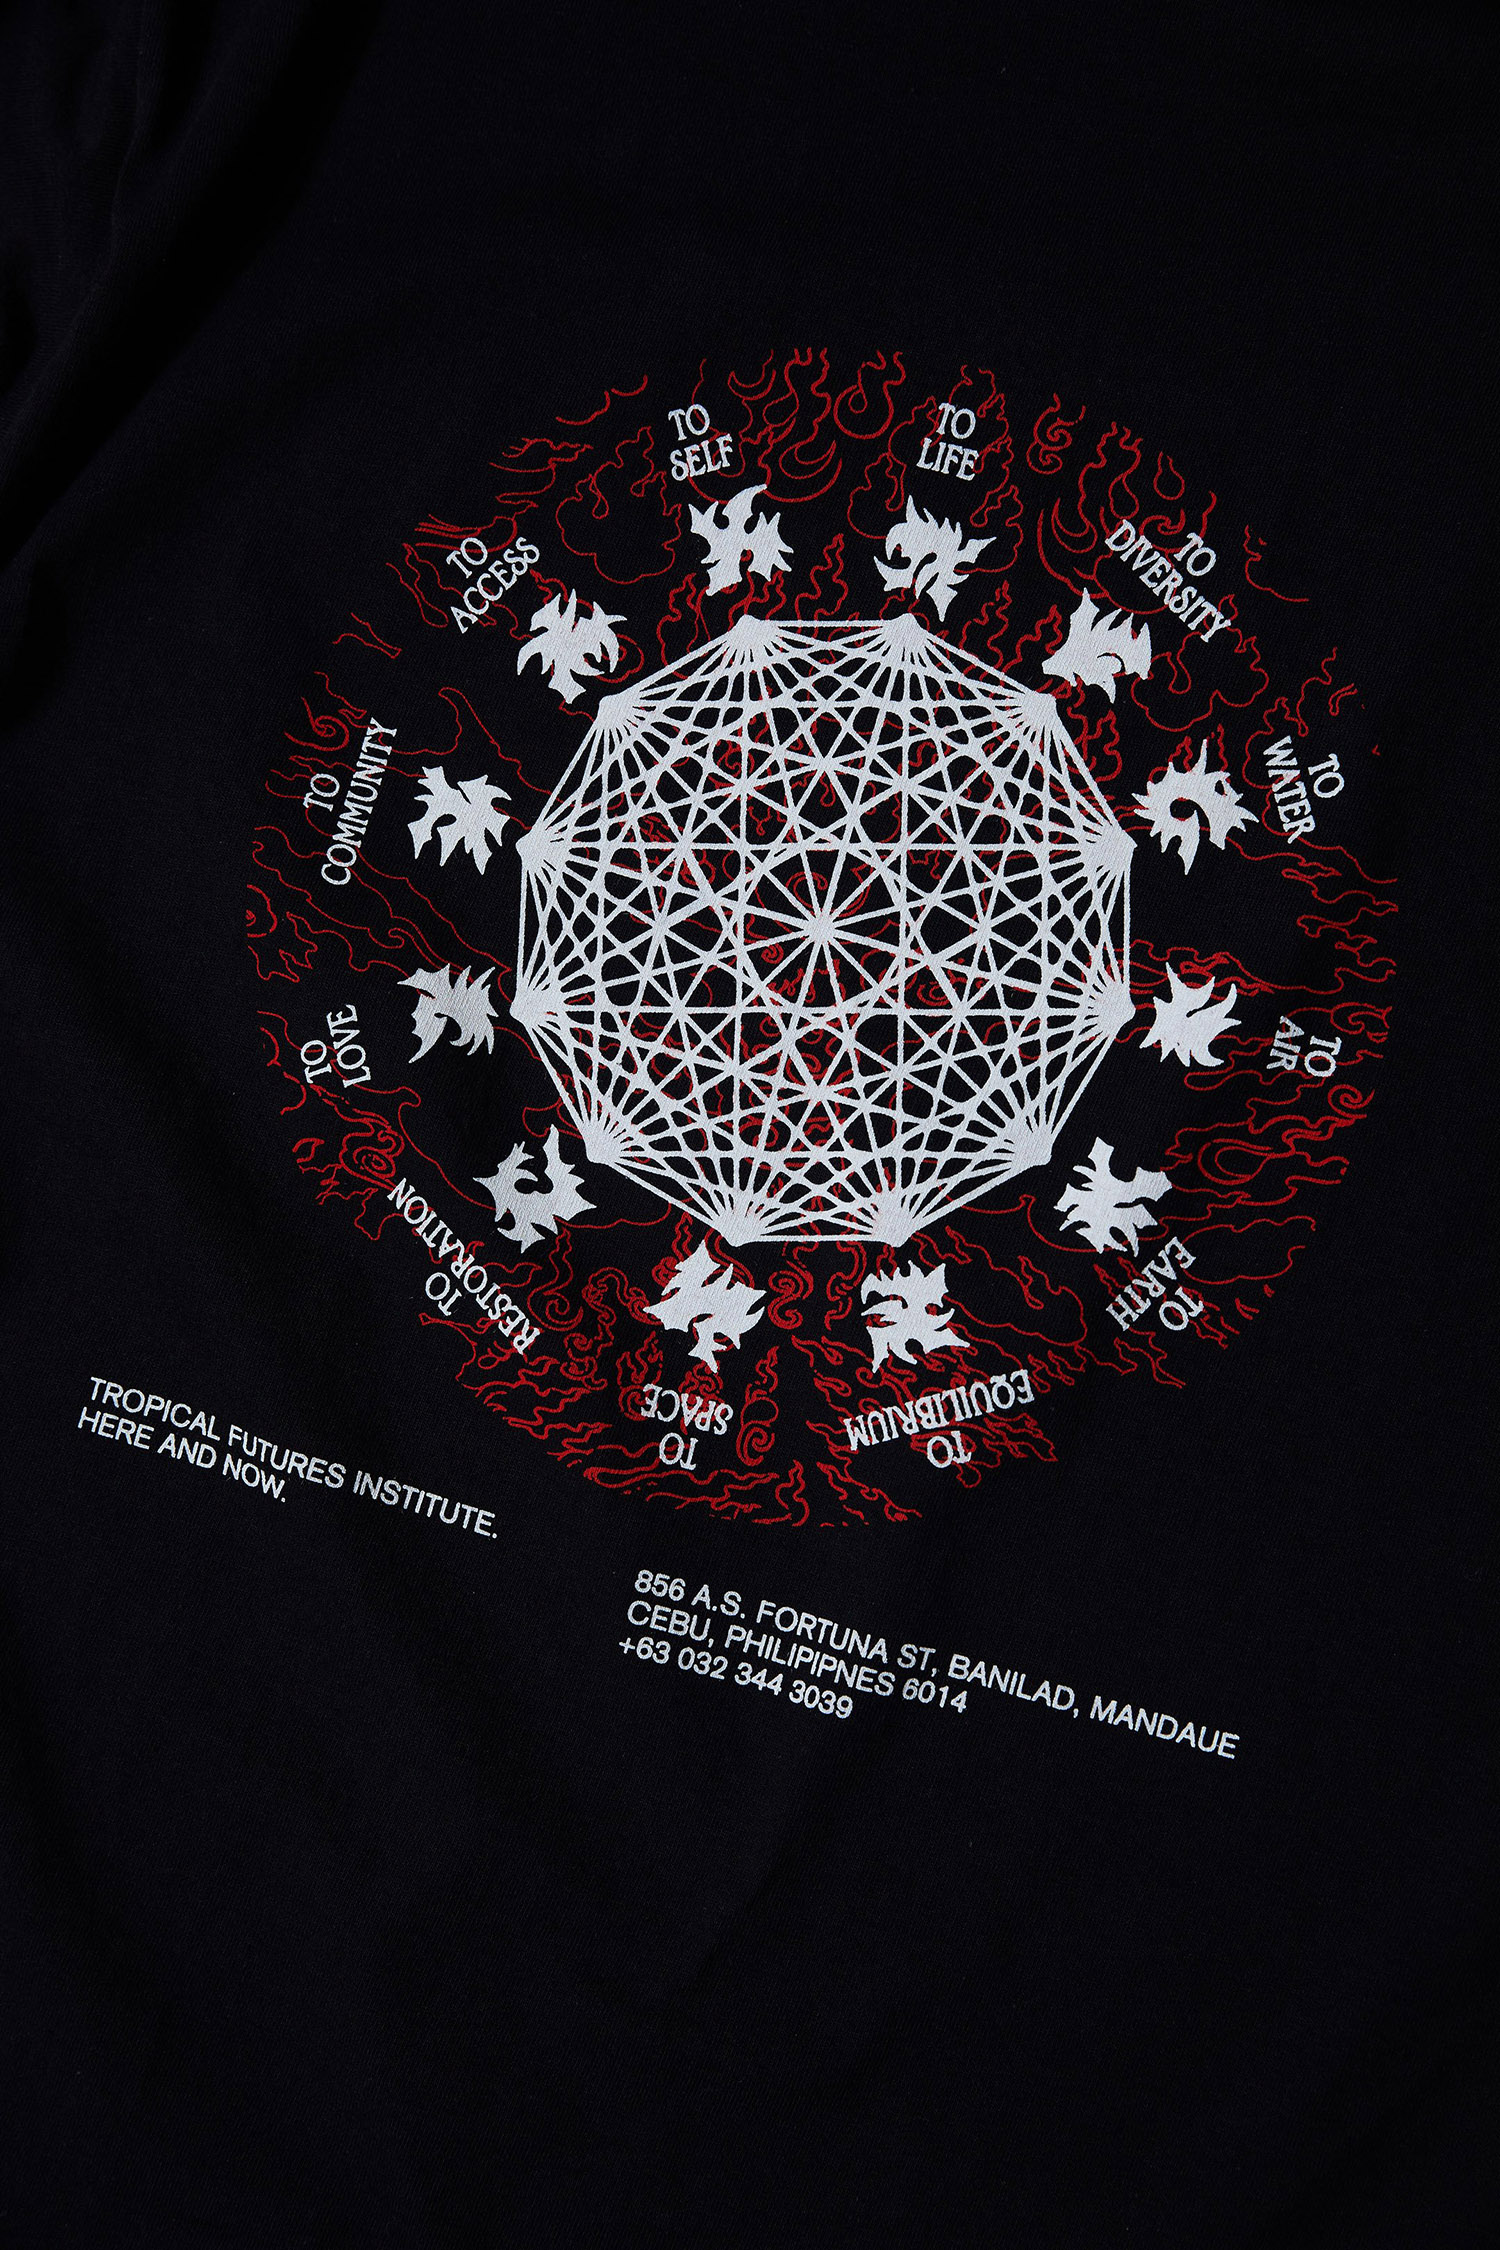 The Here and Now design is a white mandala with points calling out ideals like 